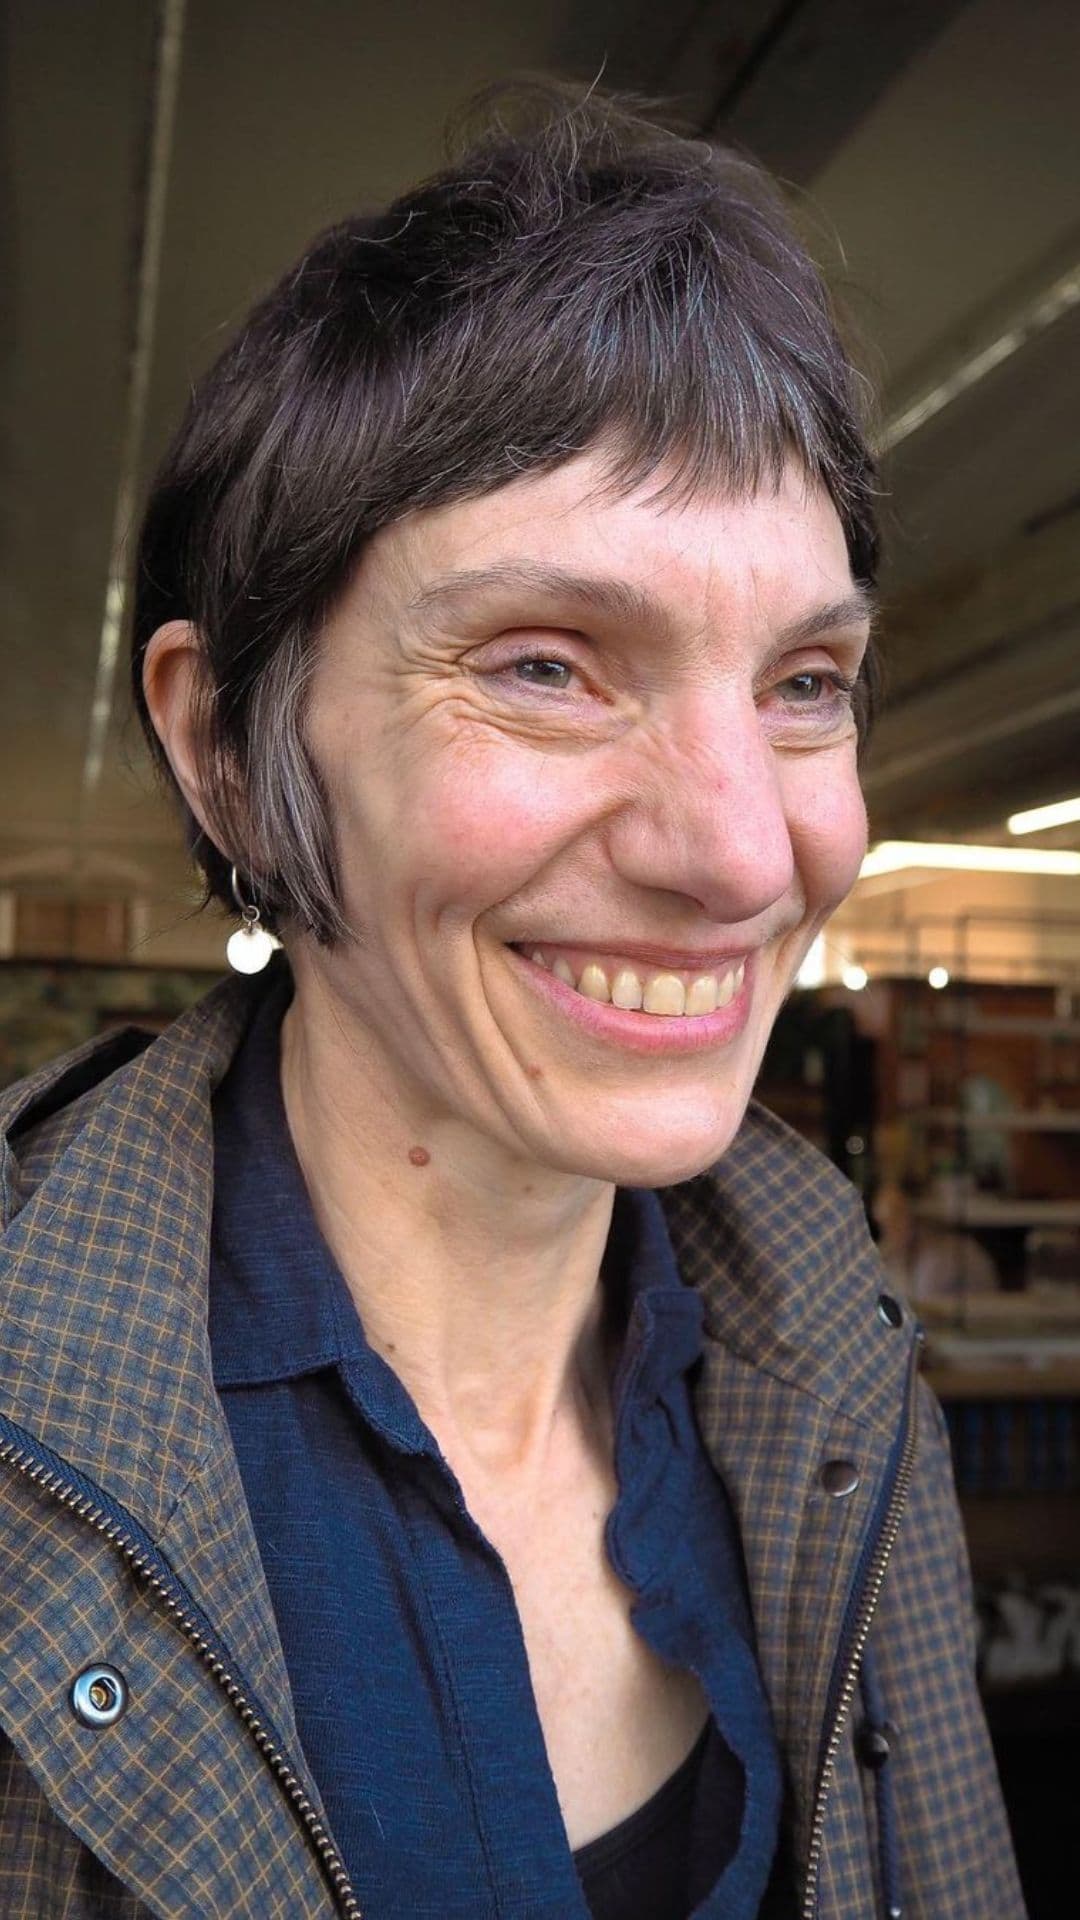 An older woman modelling a shaggy pixie bob hairstyle.